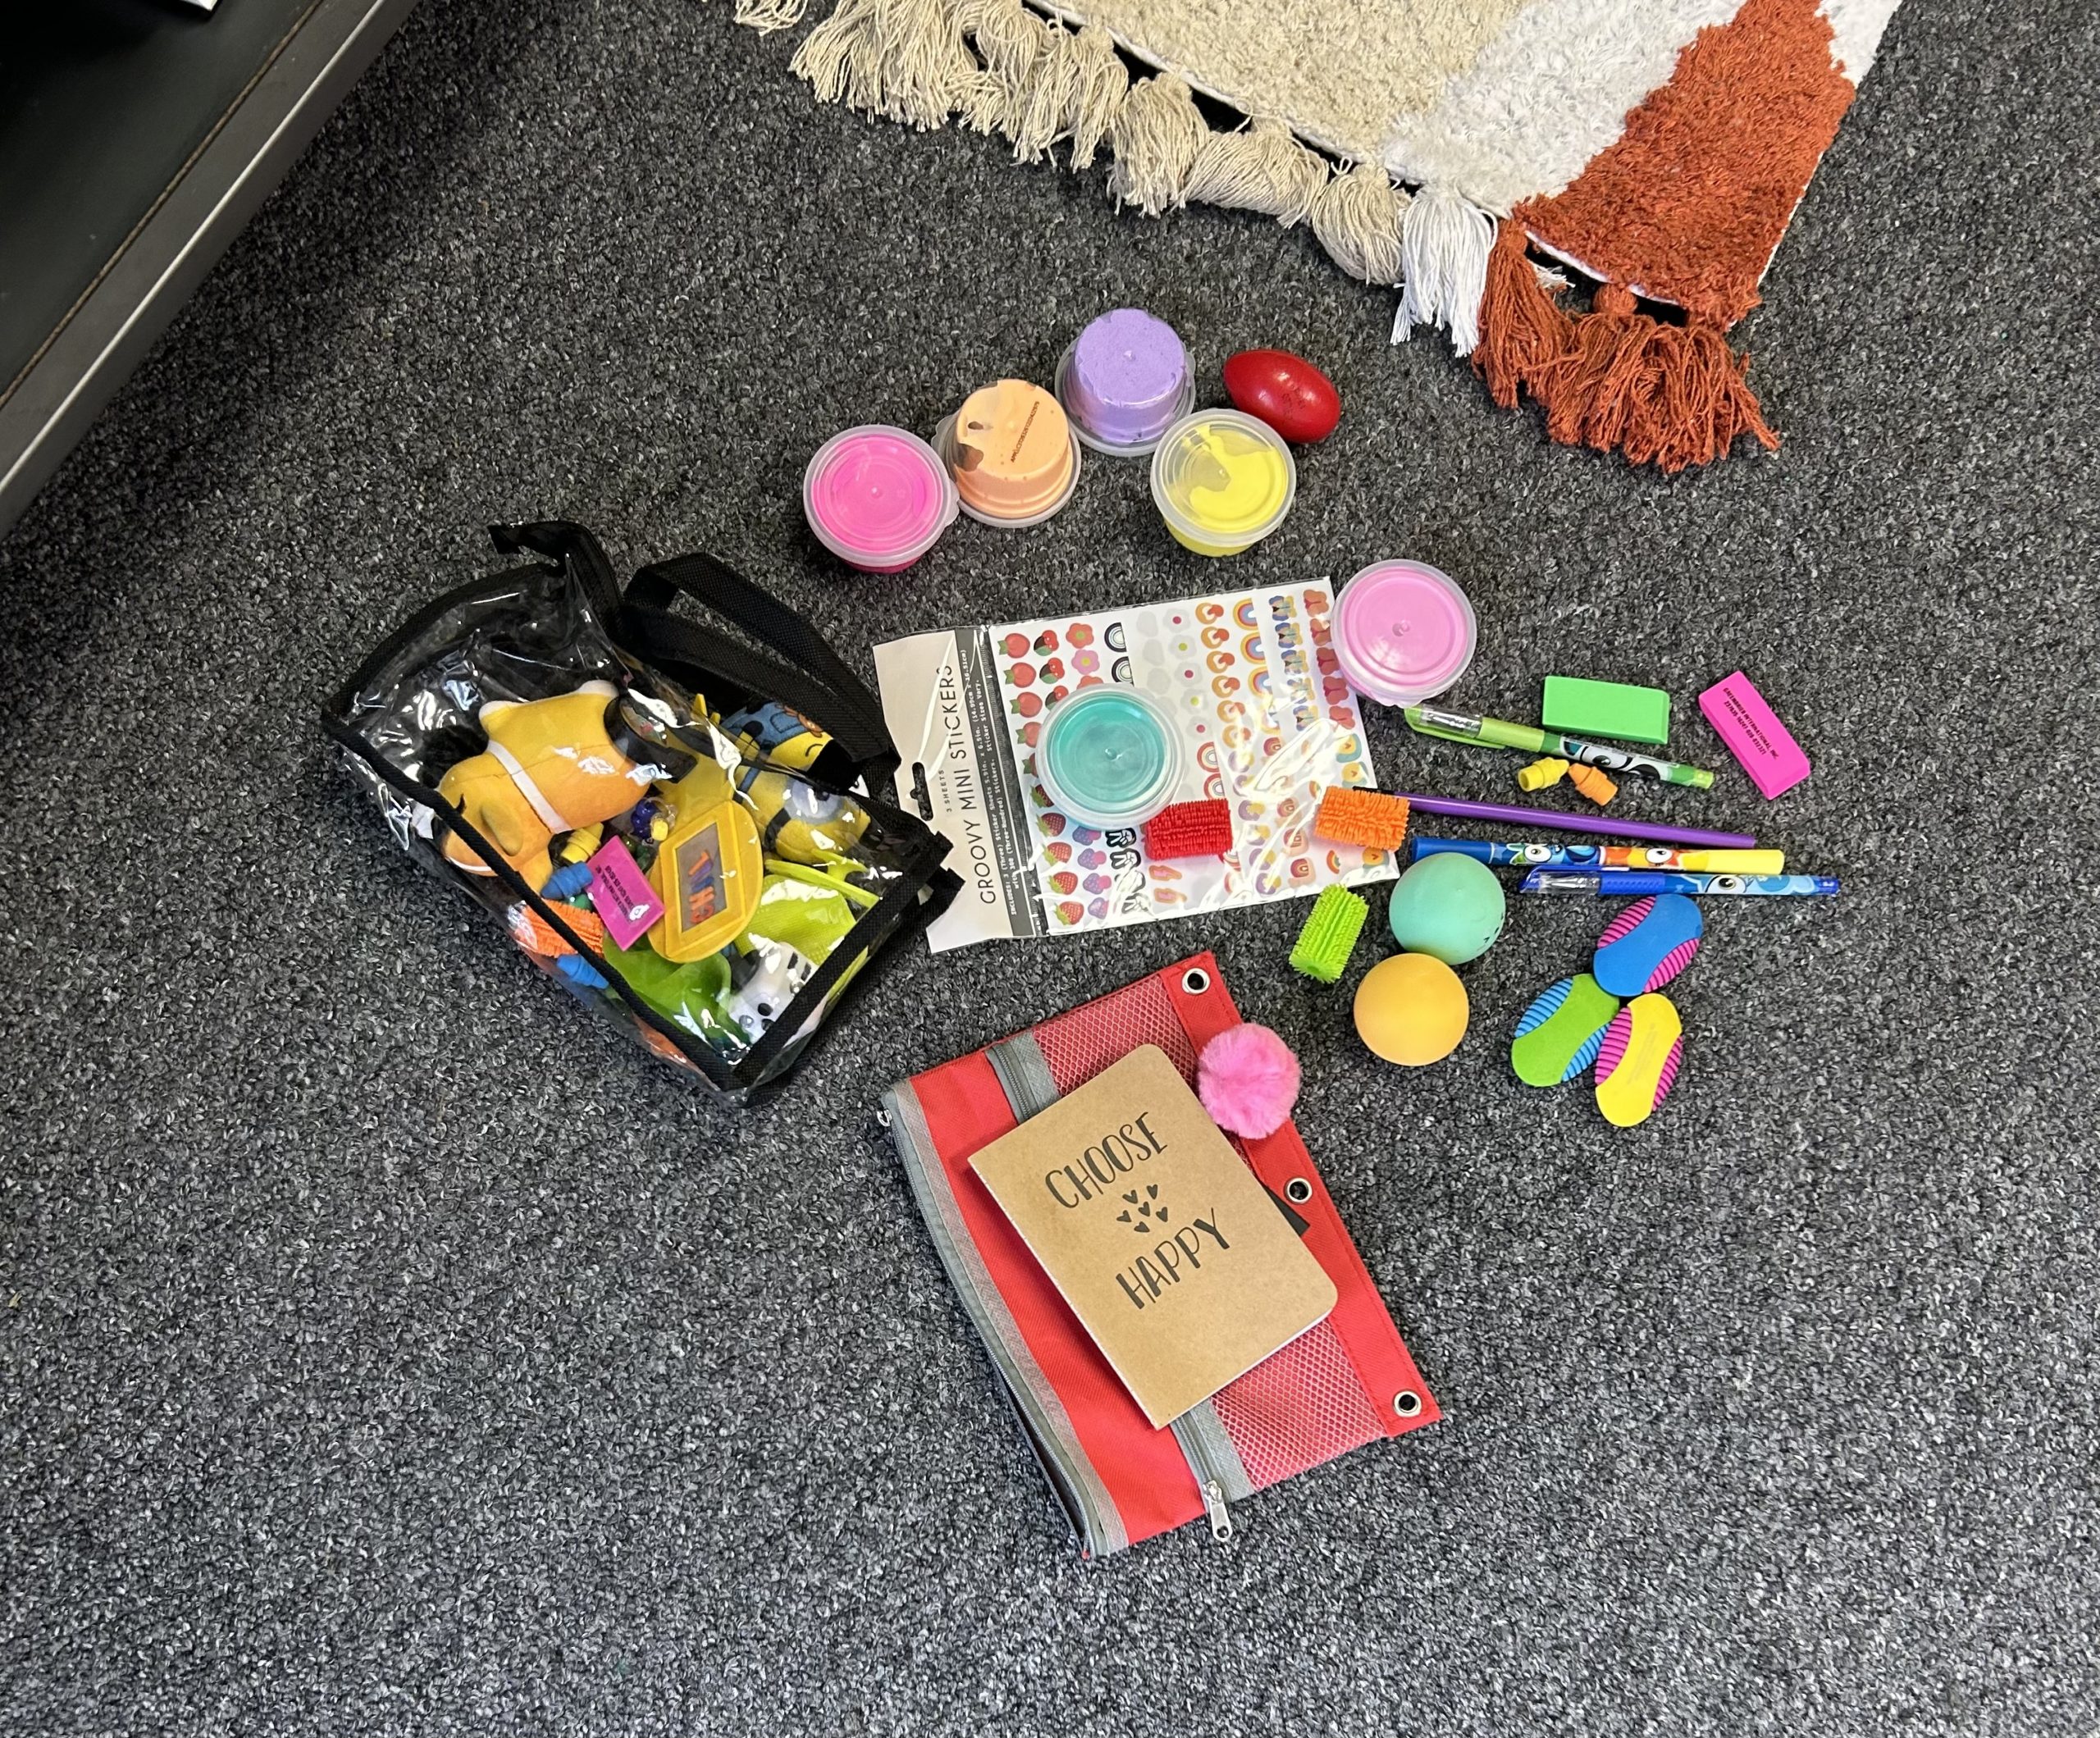 Piles of fidgets and sensory items such as pom poms, squishies, notebooks and scented pens